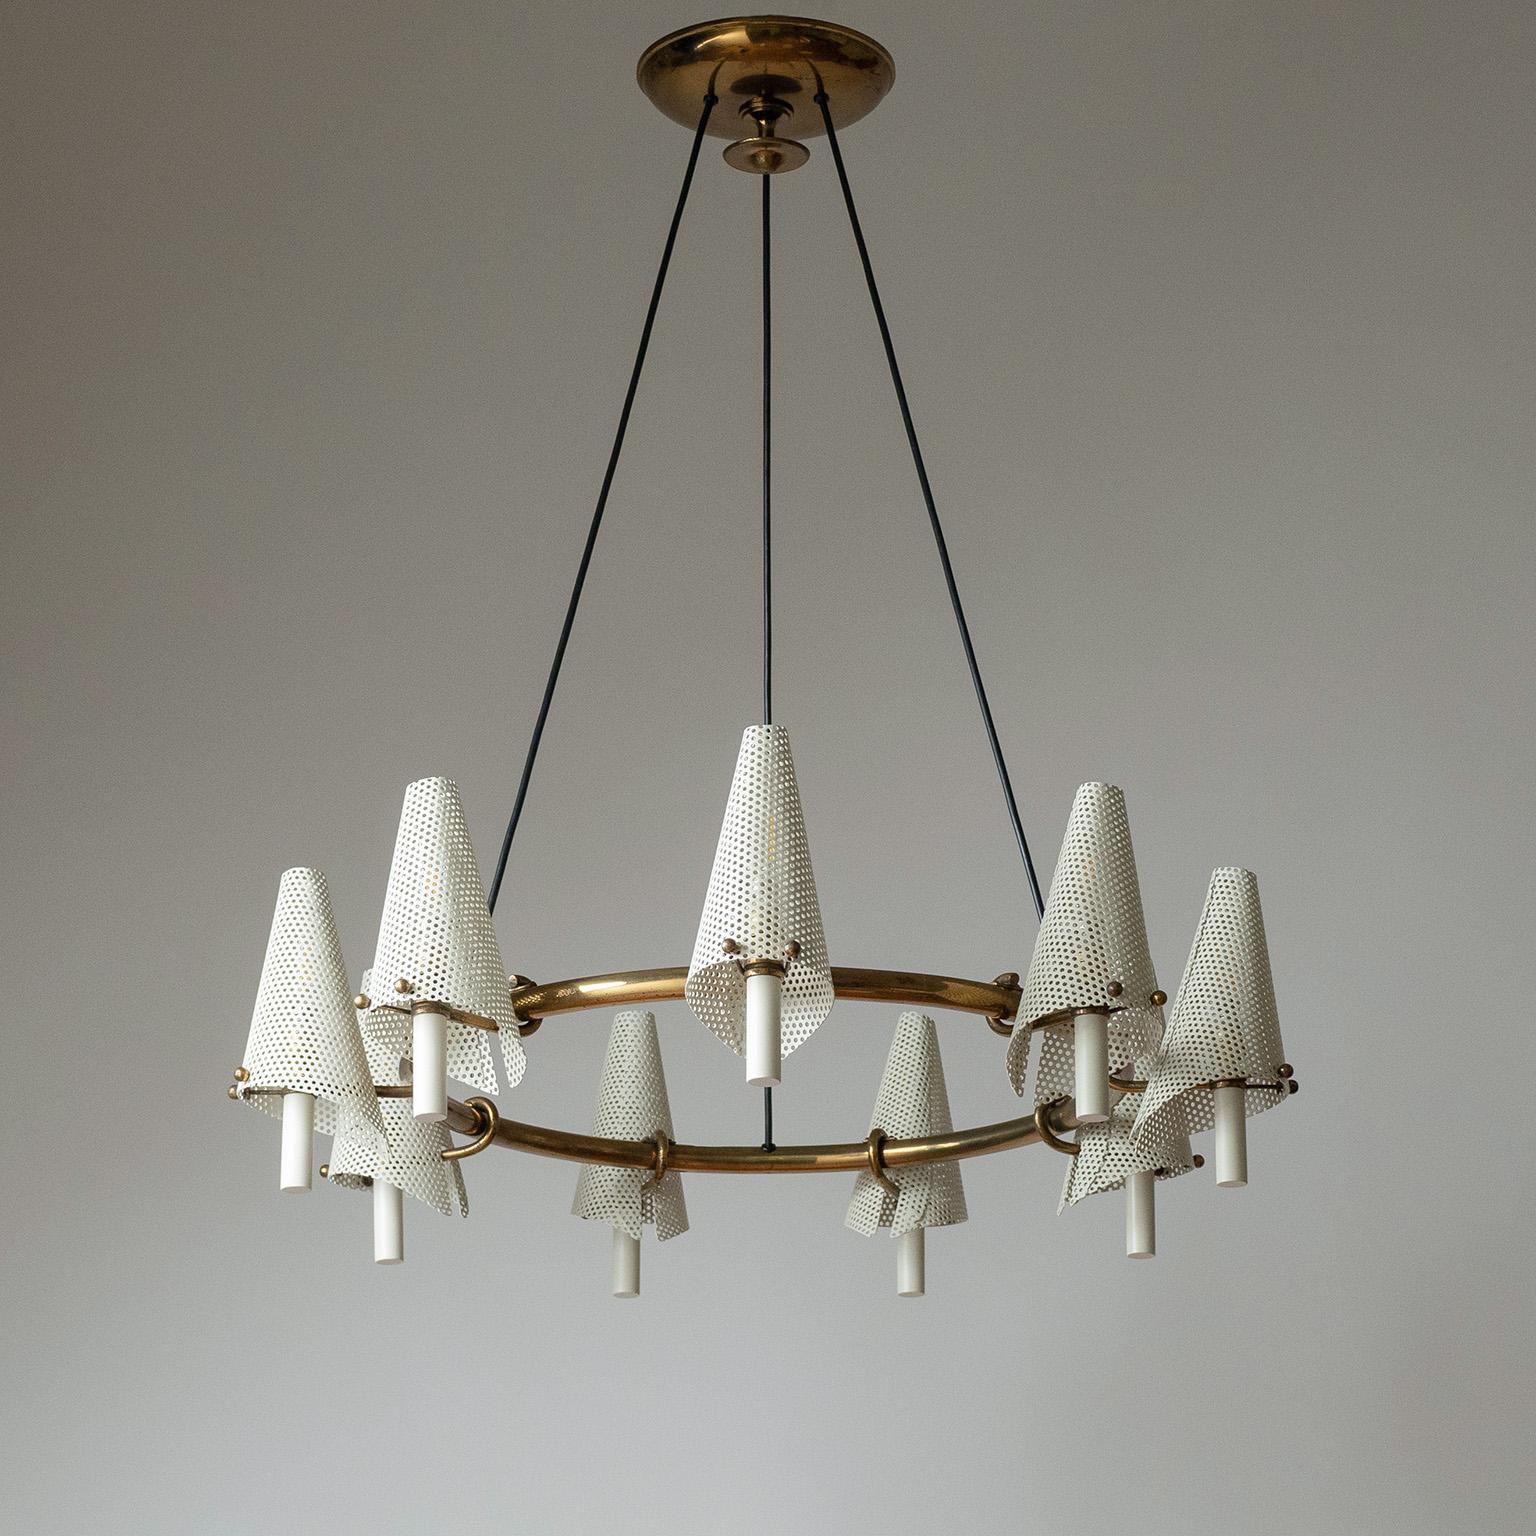 Rare Italian suspension chandelier from the late 1940s to early 1950s. Large brass ring with nine sculptural sconce-like arms with perforated steel shades. This is most likely a custom piece and therefore unique. Nine brass and ceramic E14 sockets